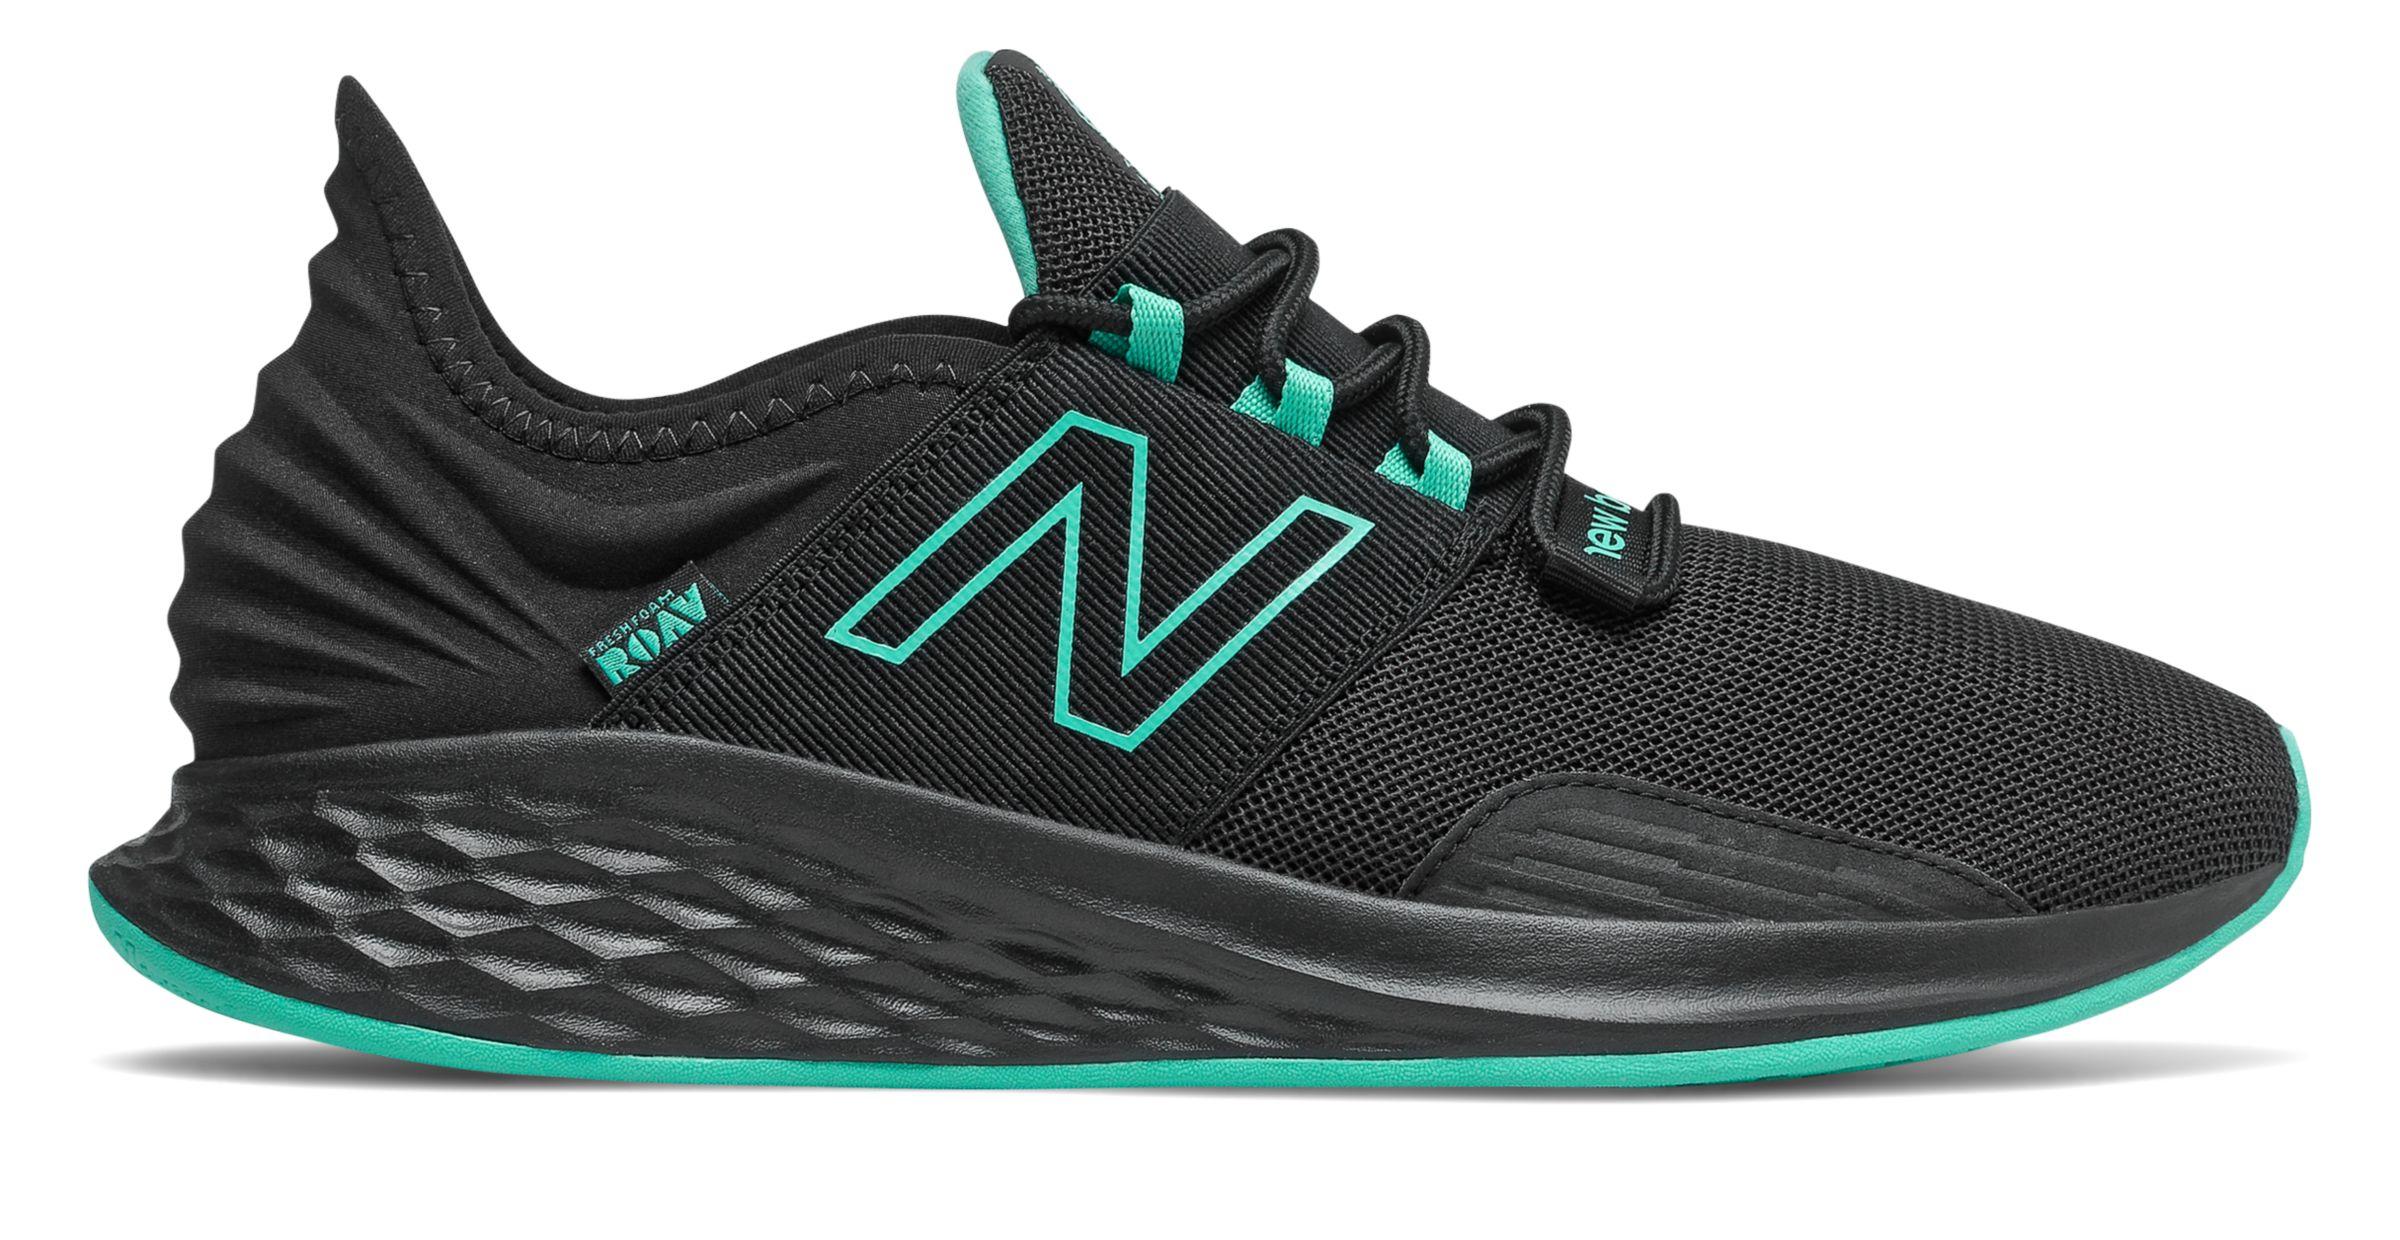 liverpool new balance sneakers